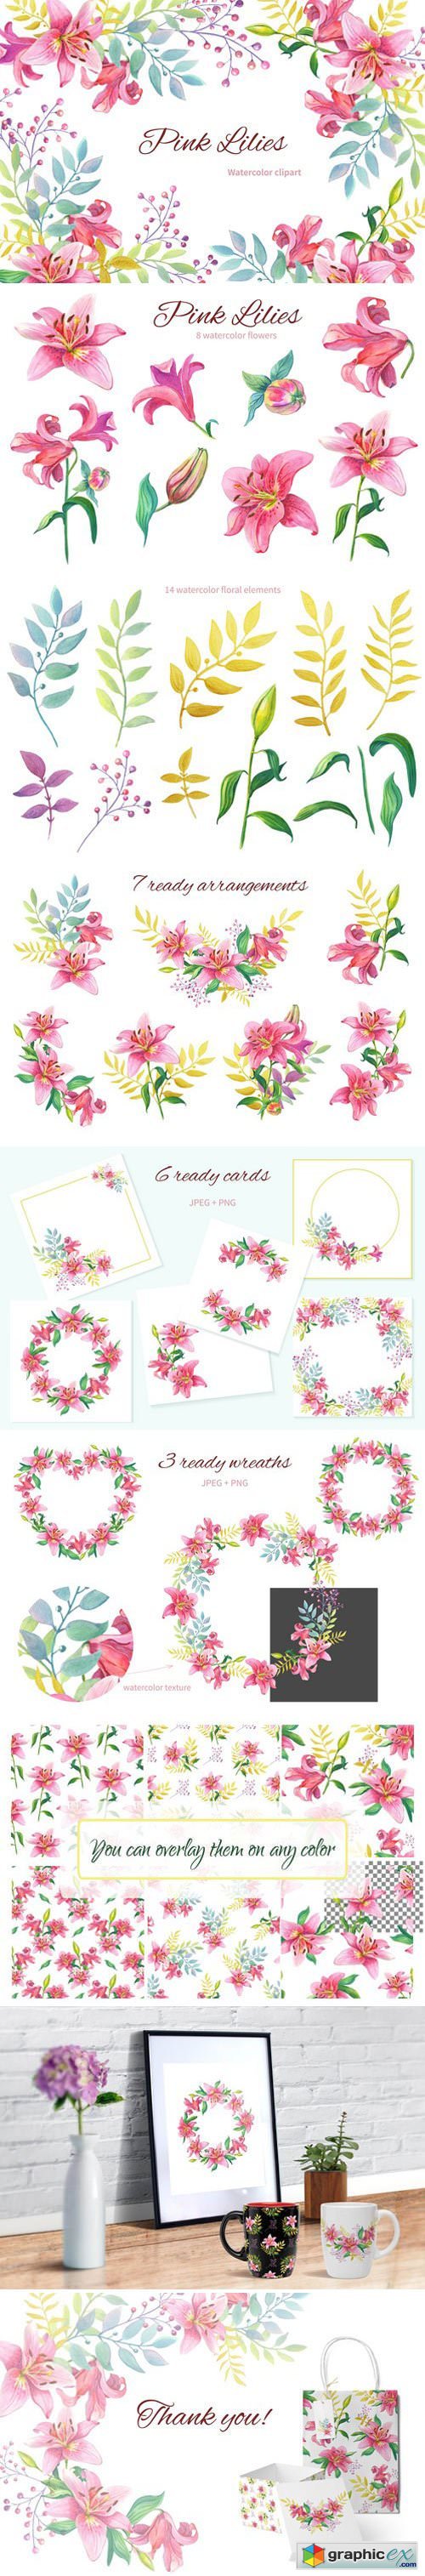 Pink Lilies.Watercolor clipart